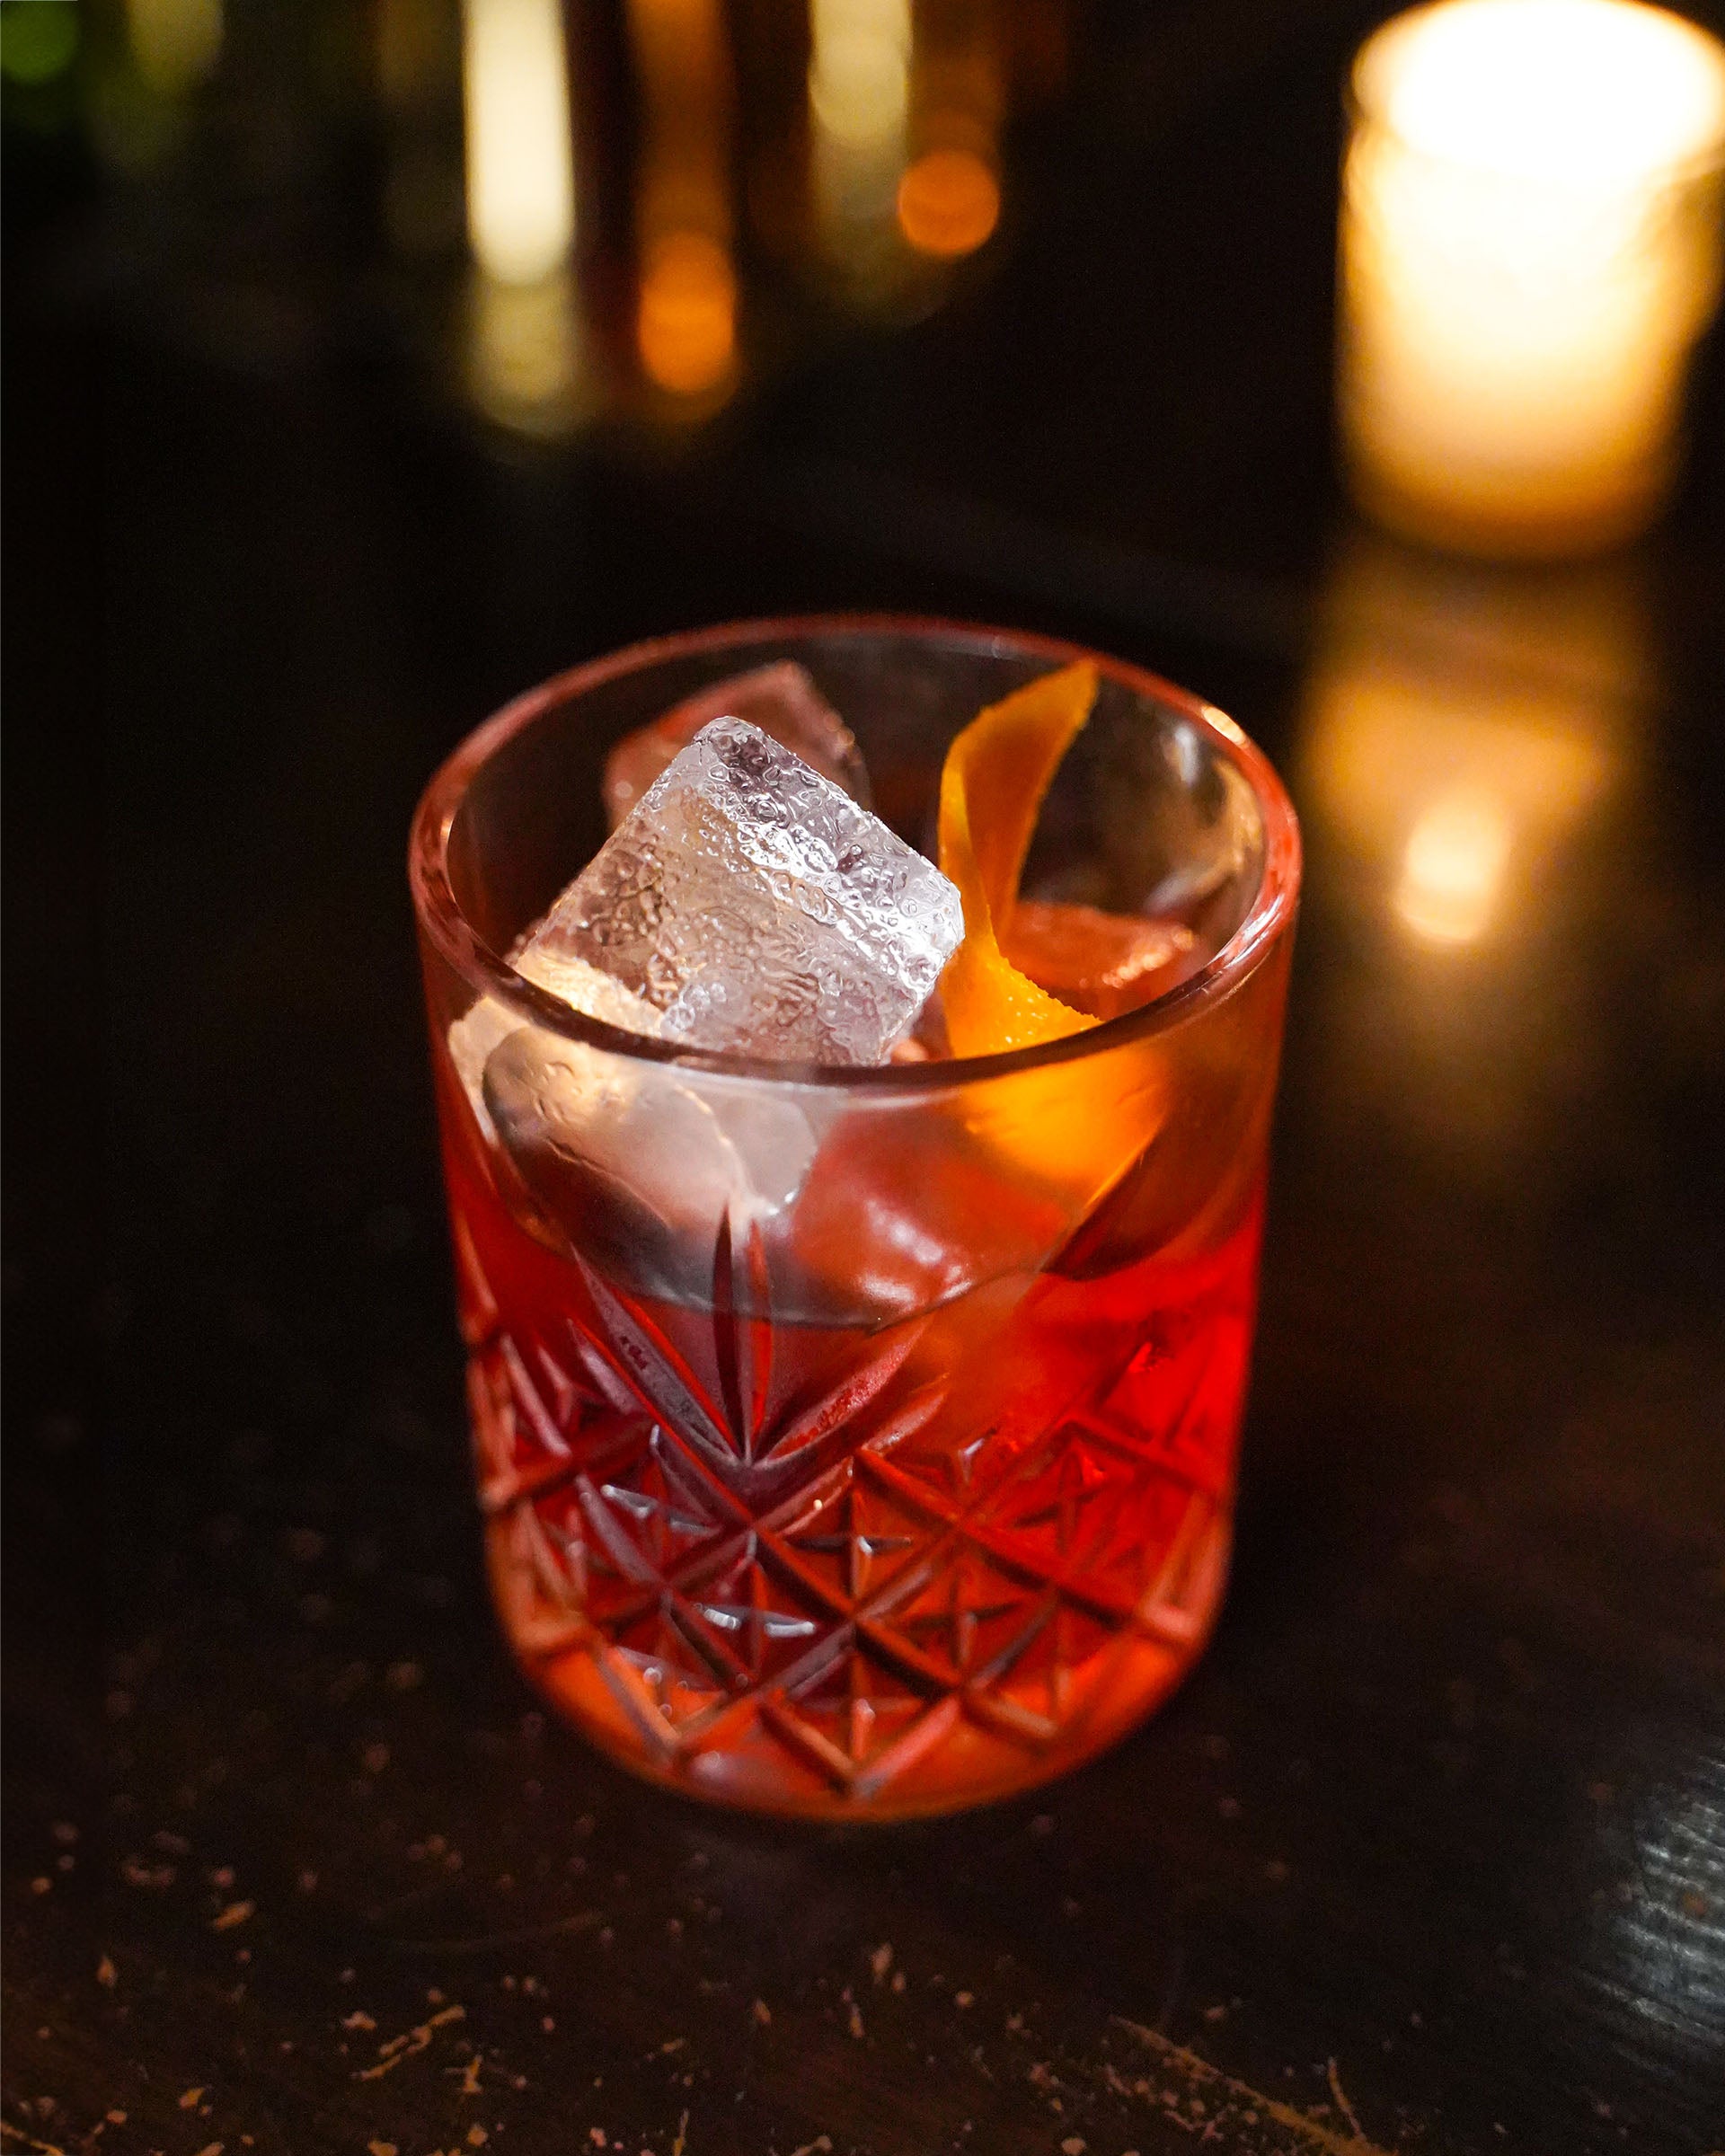 The Passion of the Negroni